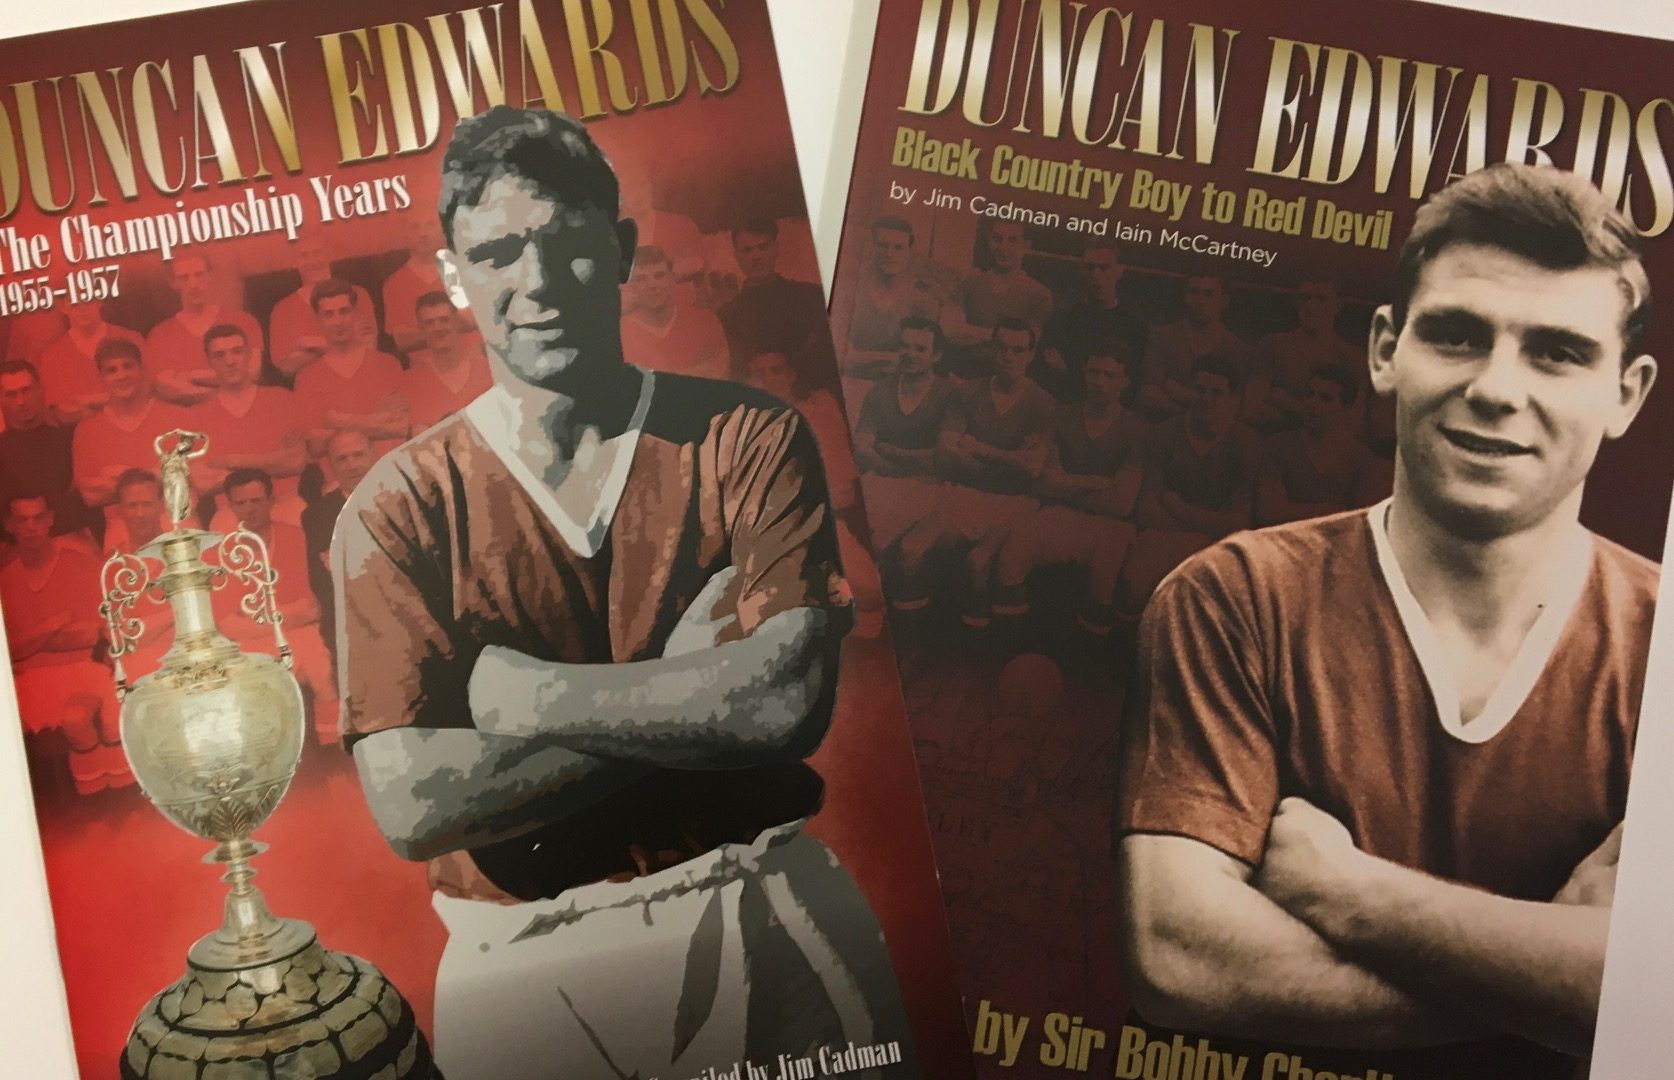 DUNCAN EDWARDS CHAMPIONSHIP YEARS BOOK NOW AVAILABLE